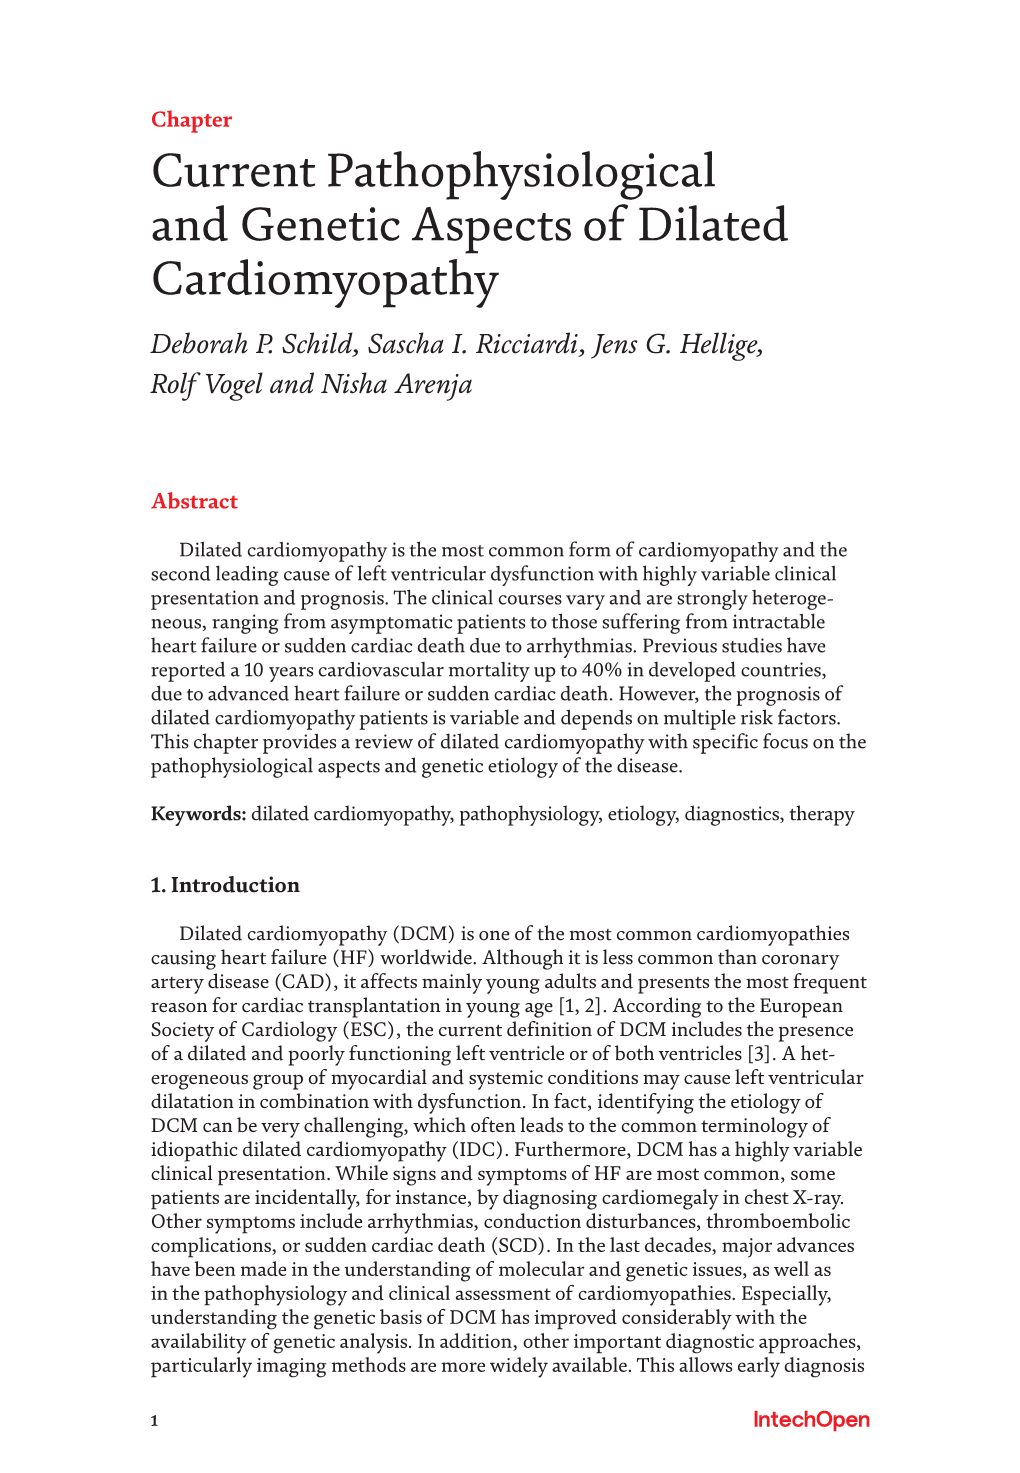 Current Pathophysiological and Genetic Aspects of Dilated Cardiomyopathy Deborah P